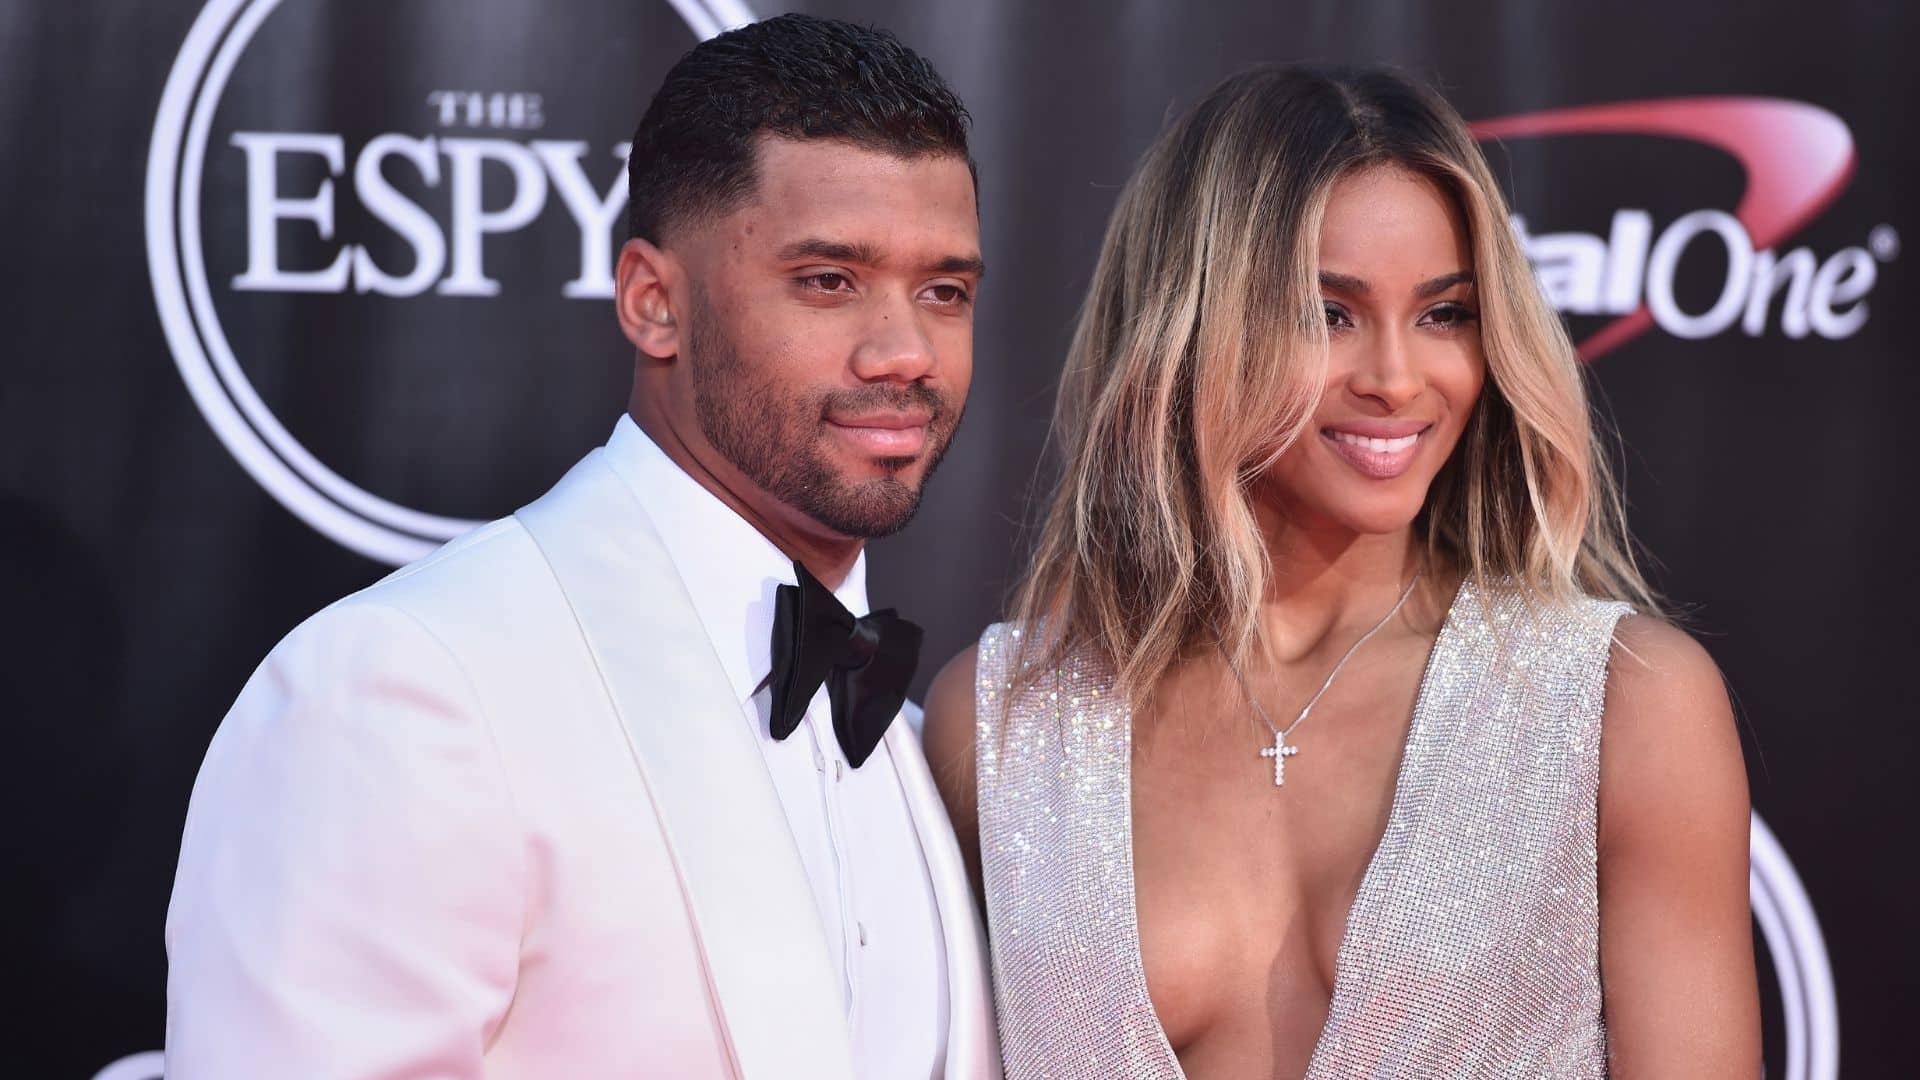 Russell Wilson Net Worth 2022: Income, Salary And Career